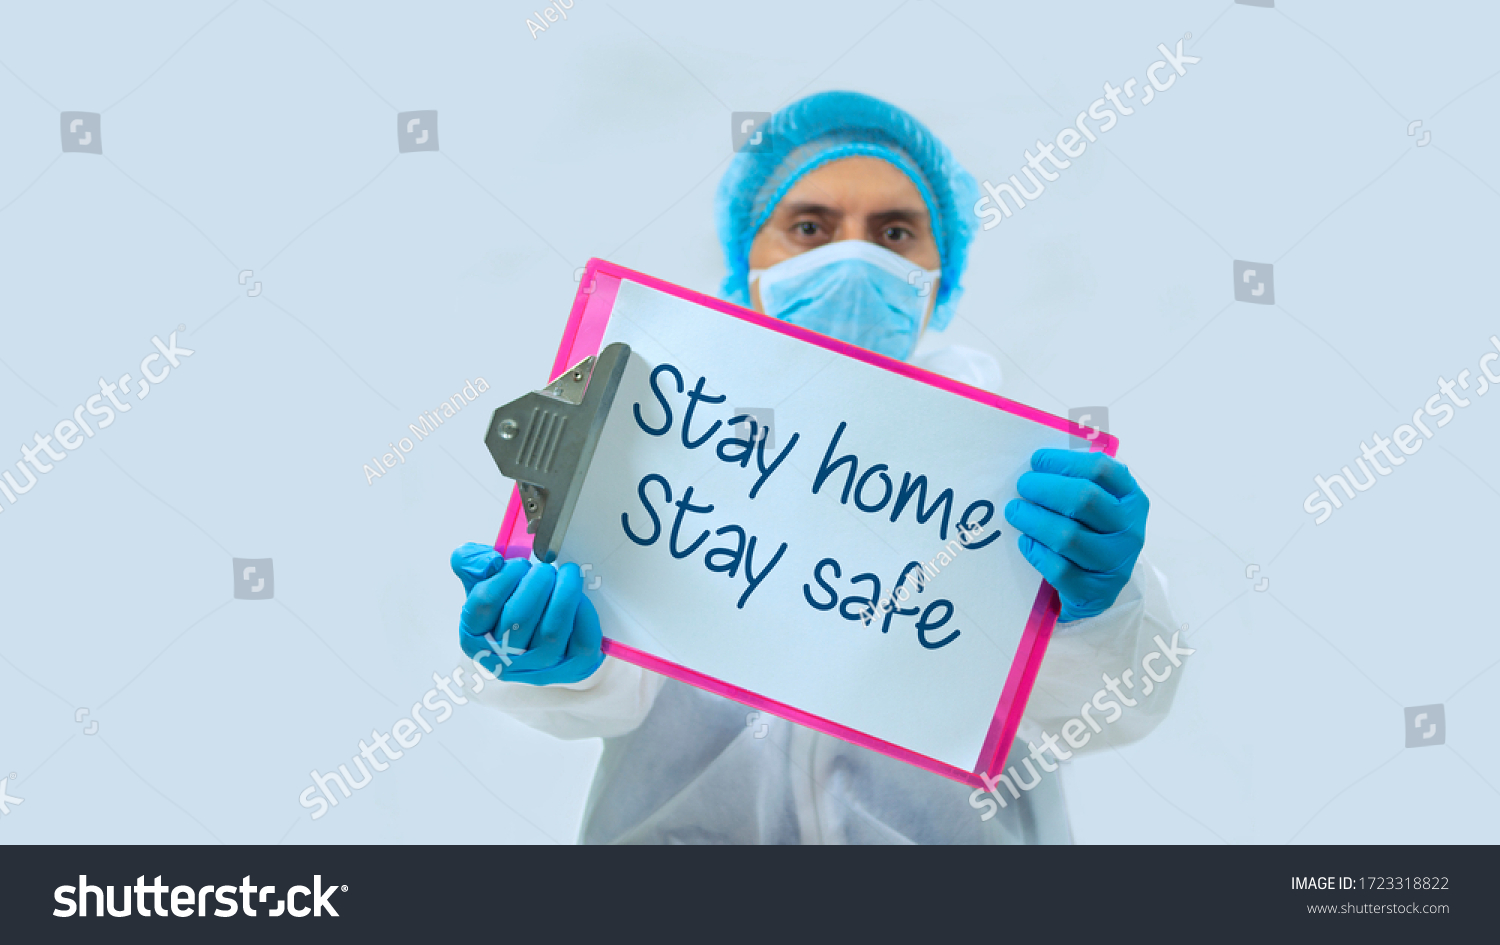 Doctor with face mask and blue gloves in background, holding a clipboard with white sheets with the message: STAY HOME, STAY SAFE in the foreground #1723318822